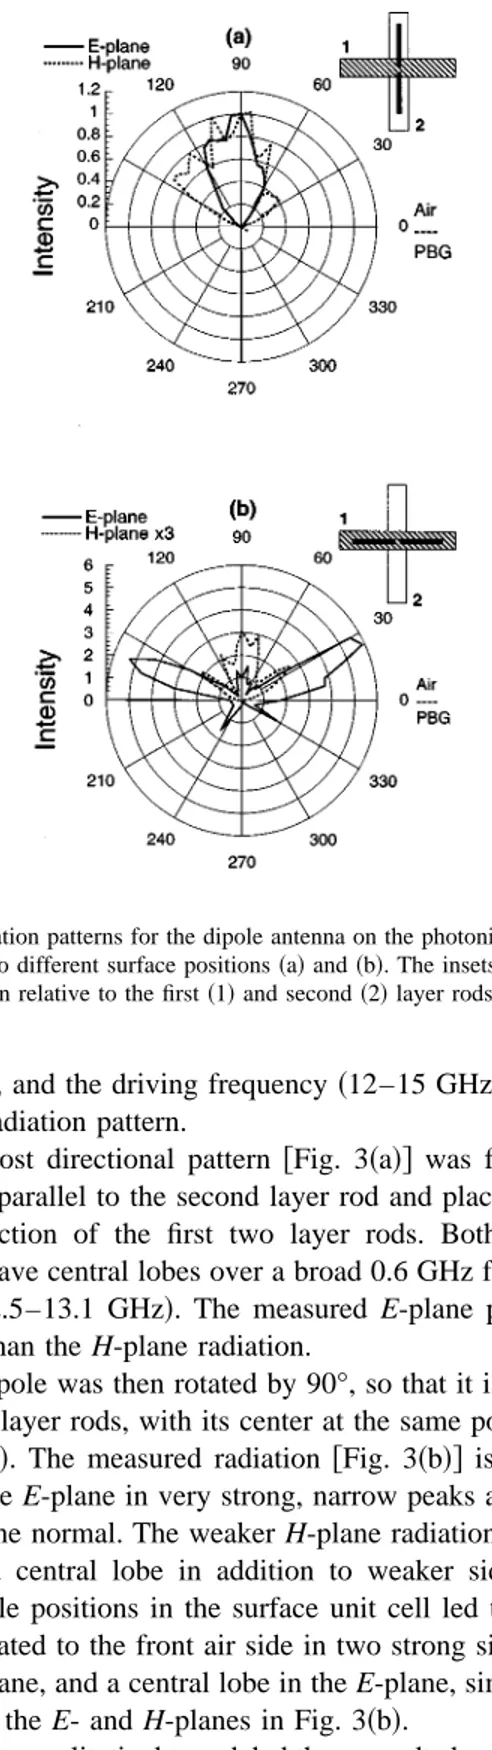 FIG. 2. E- and H-plane radiation patterns for the dipole antenna on a 0.25